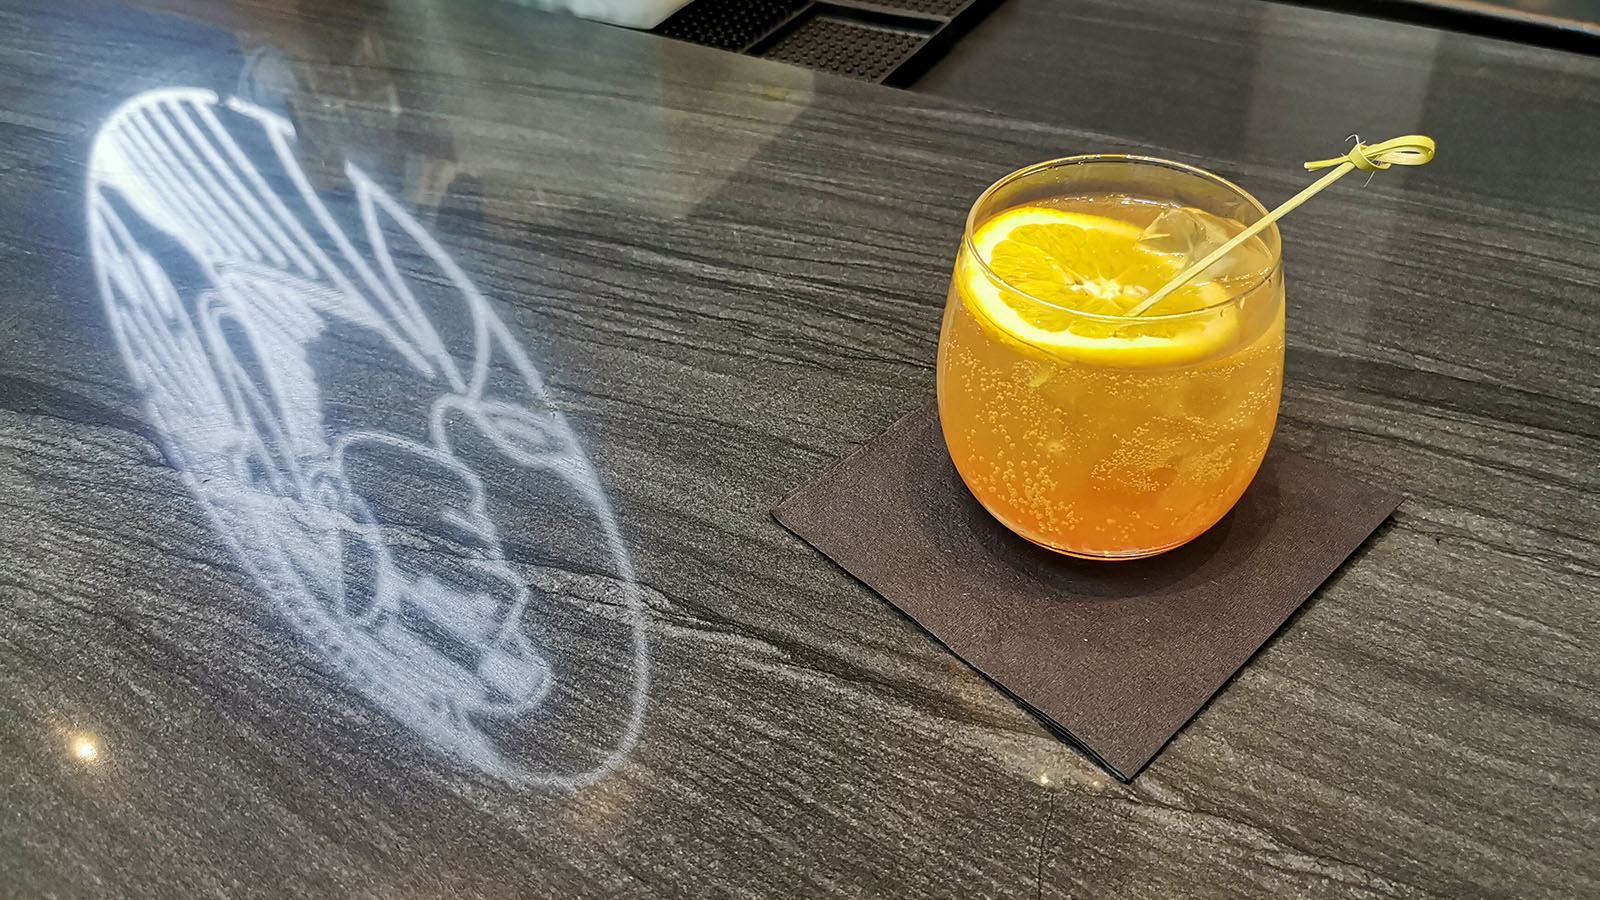 Refreshment in The Centurion Lounge, Los Angeles